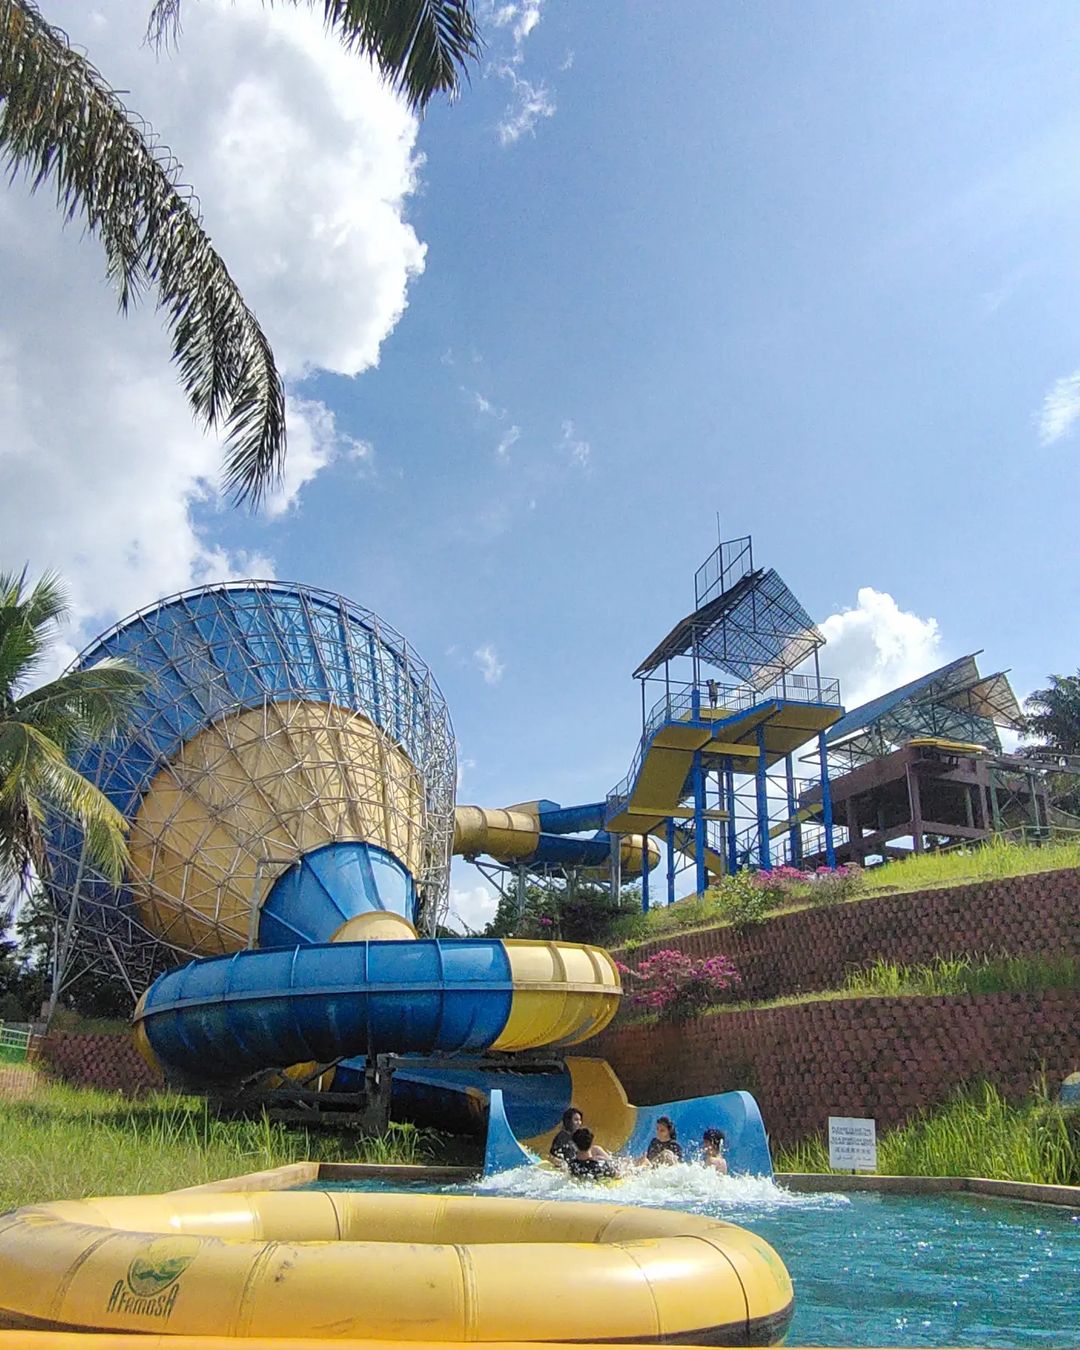 theme parks in malaysia - A’Famosa Water Theme Park big ice cream